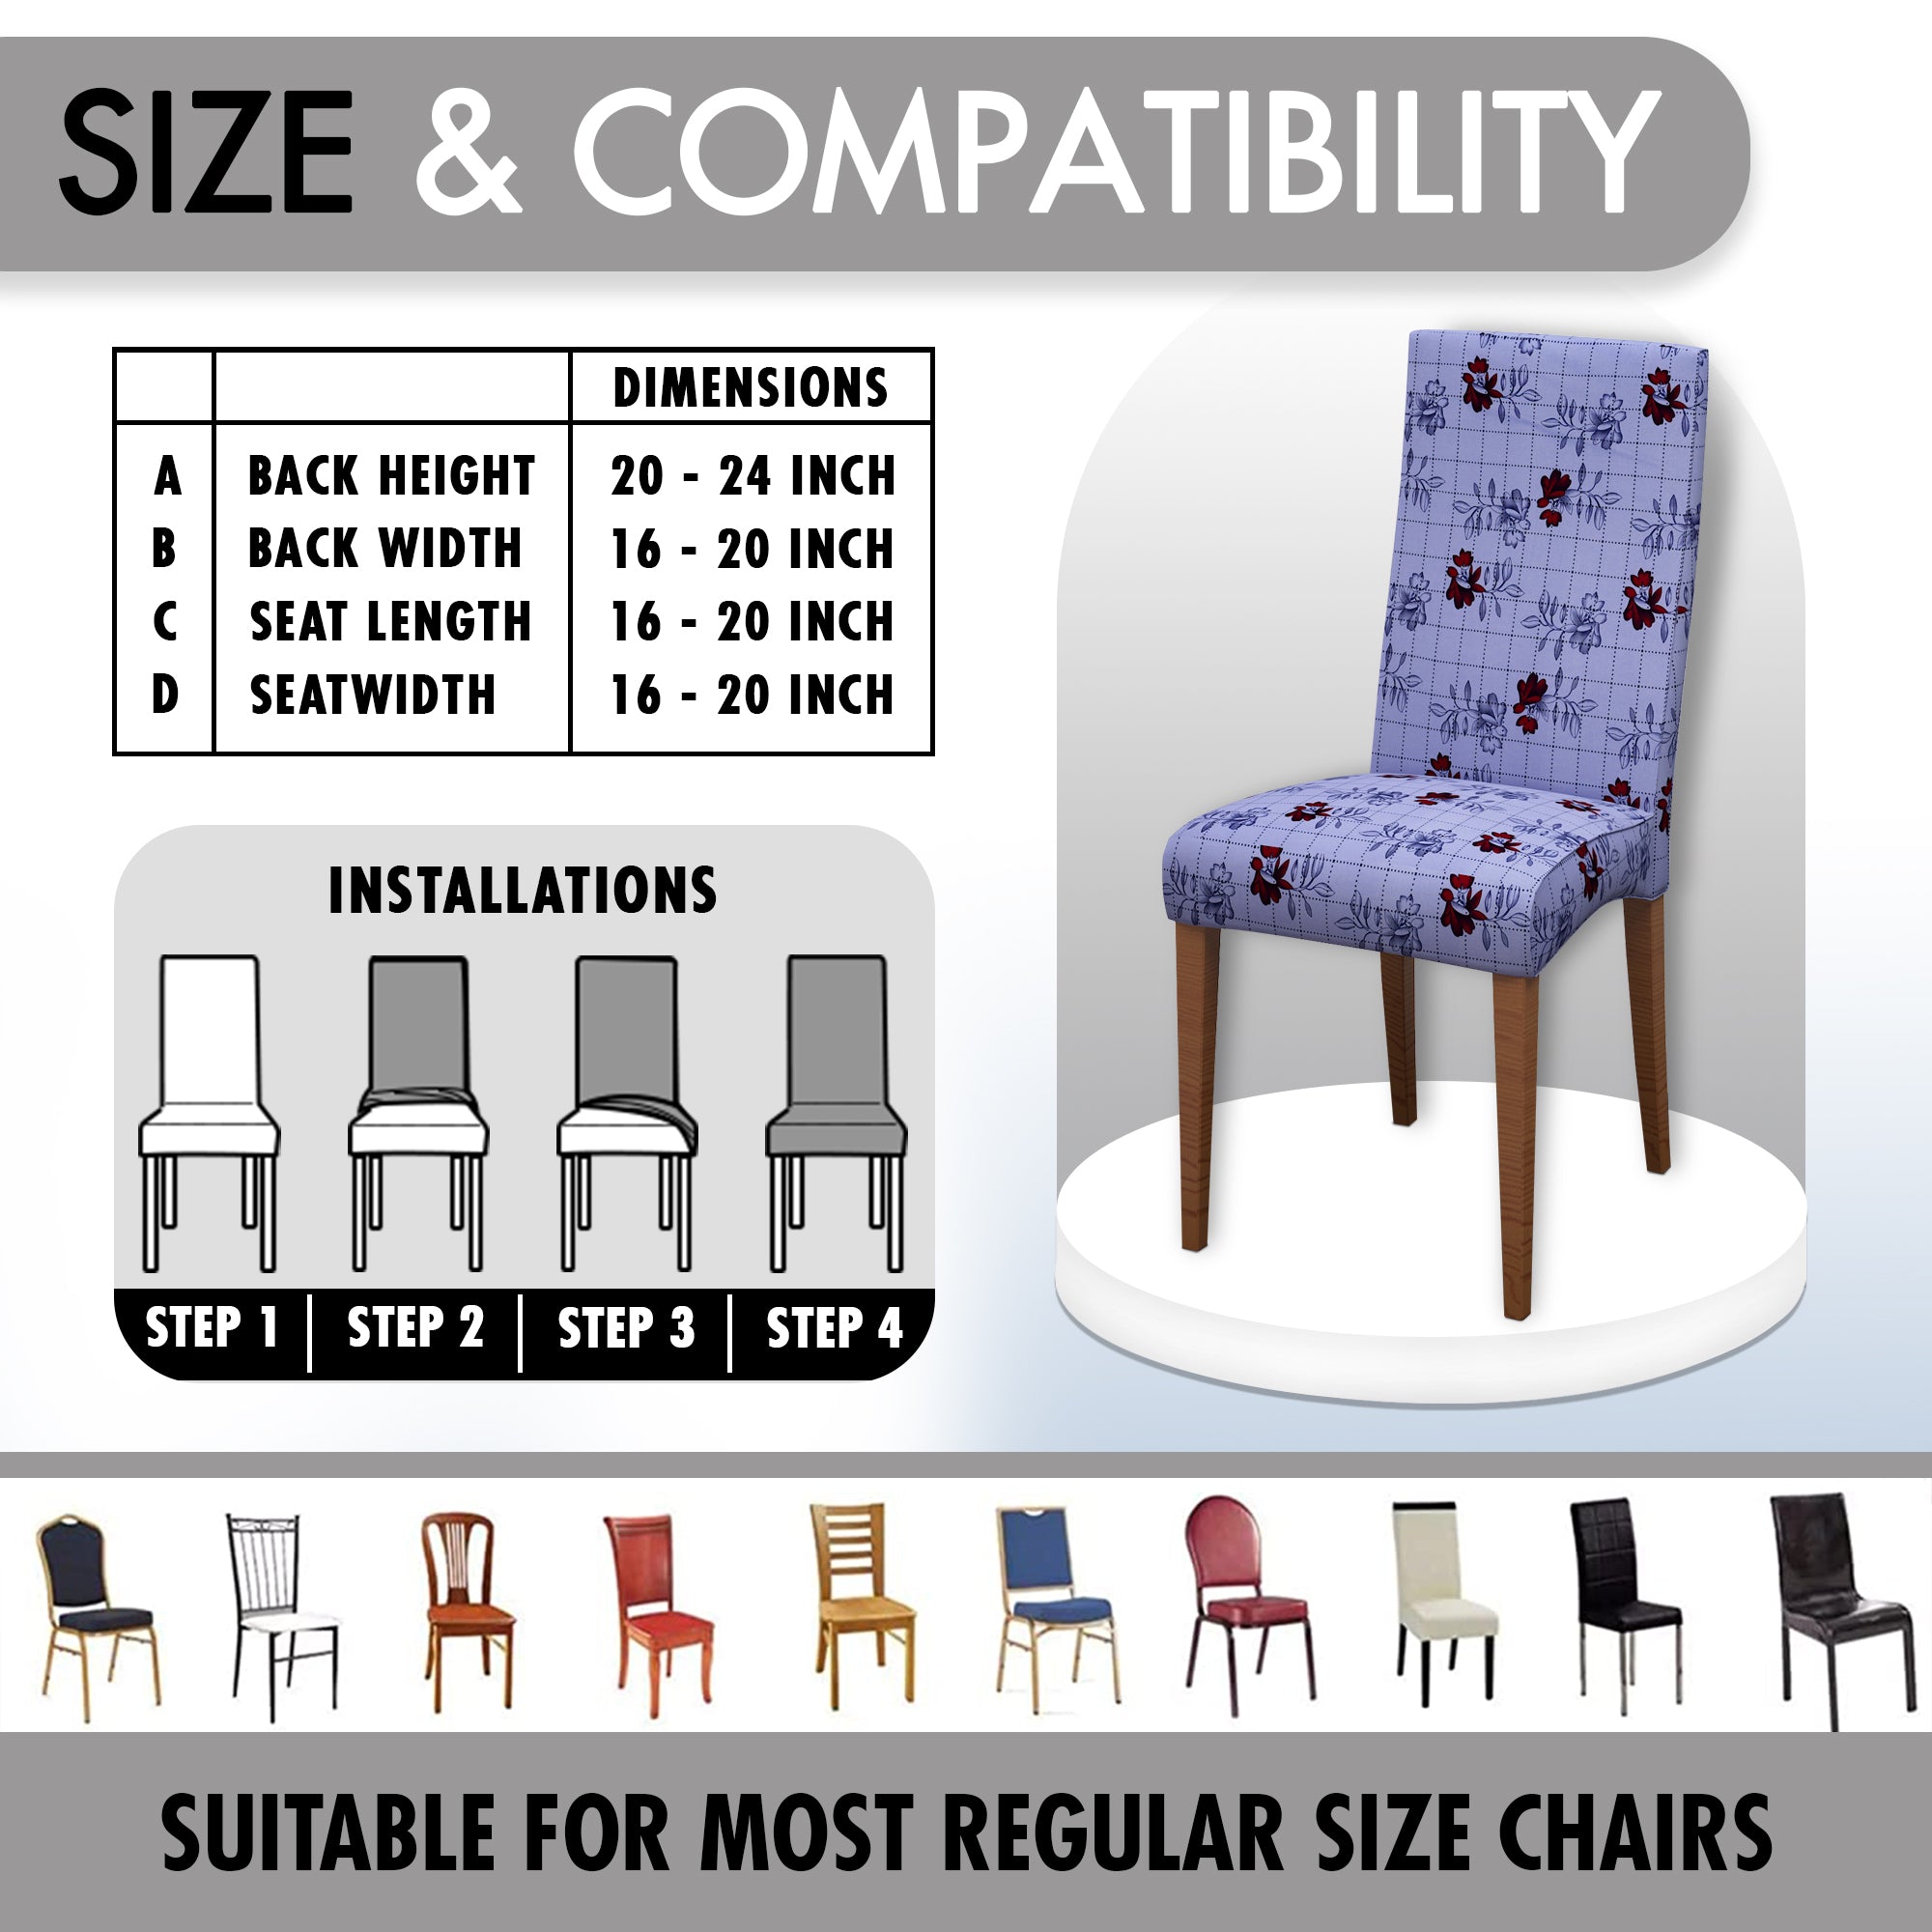 Polyester Spandex Stretchable Printed Chair Cover, MG26